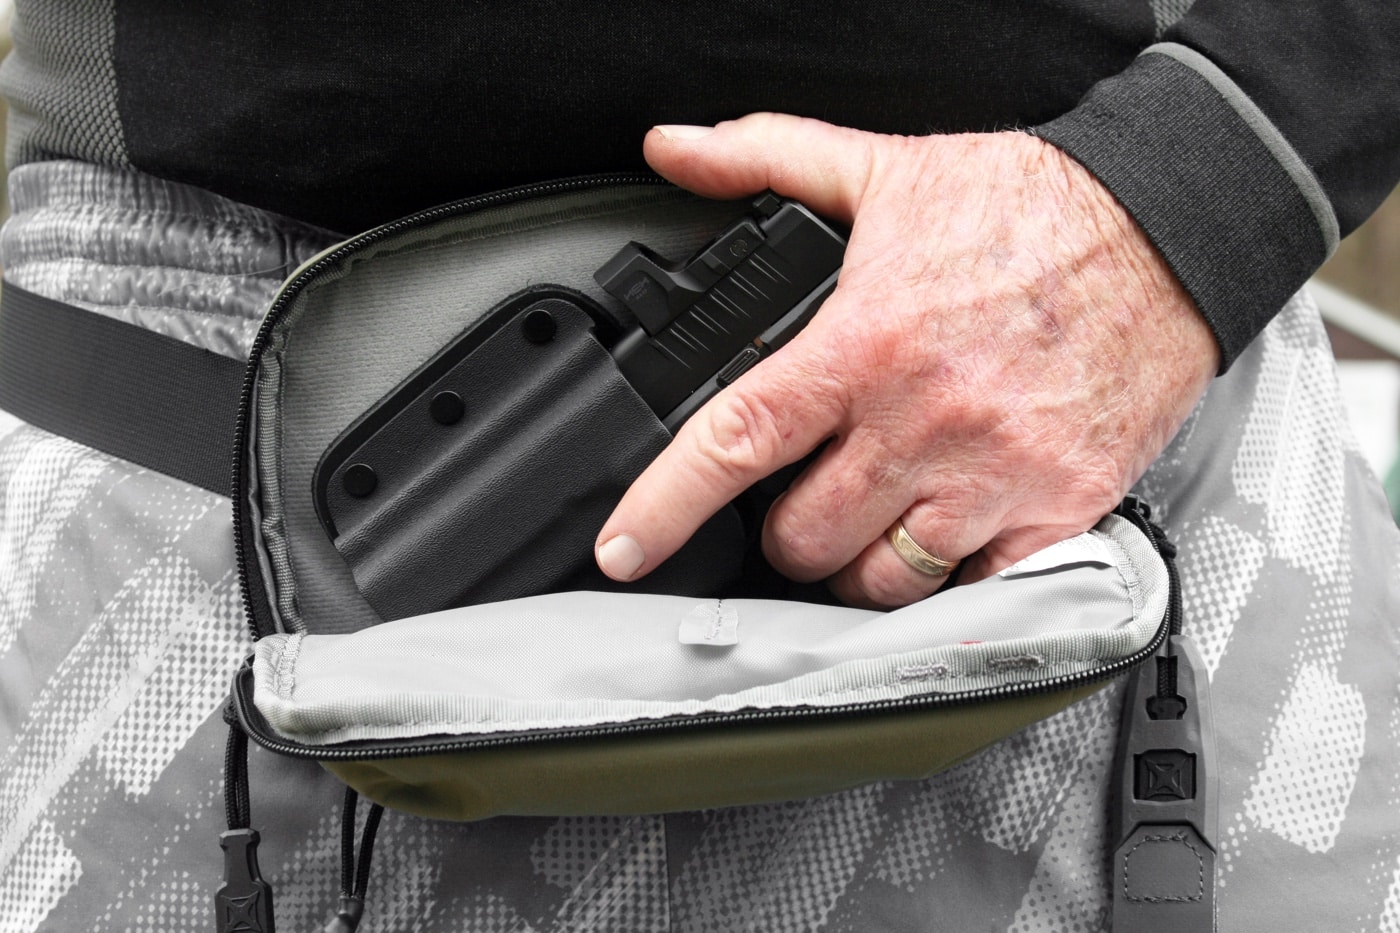 In this photo, we see the author practicing a draw of his Springfield Armory Hellcat — equipped with a red dot sight — from a unique carry bag. The bag uses Velcro and zippers to secure the handgun while not being used.